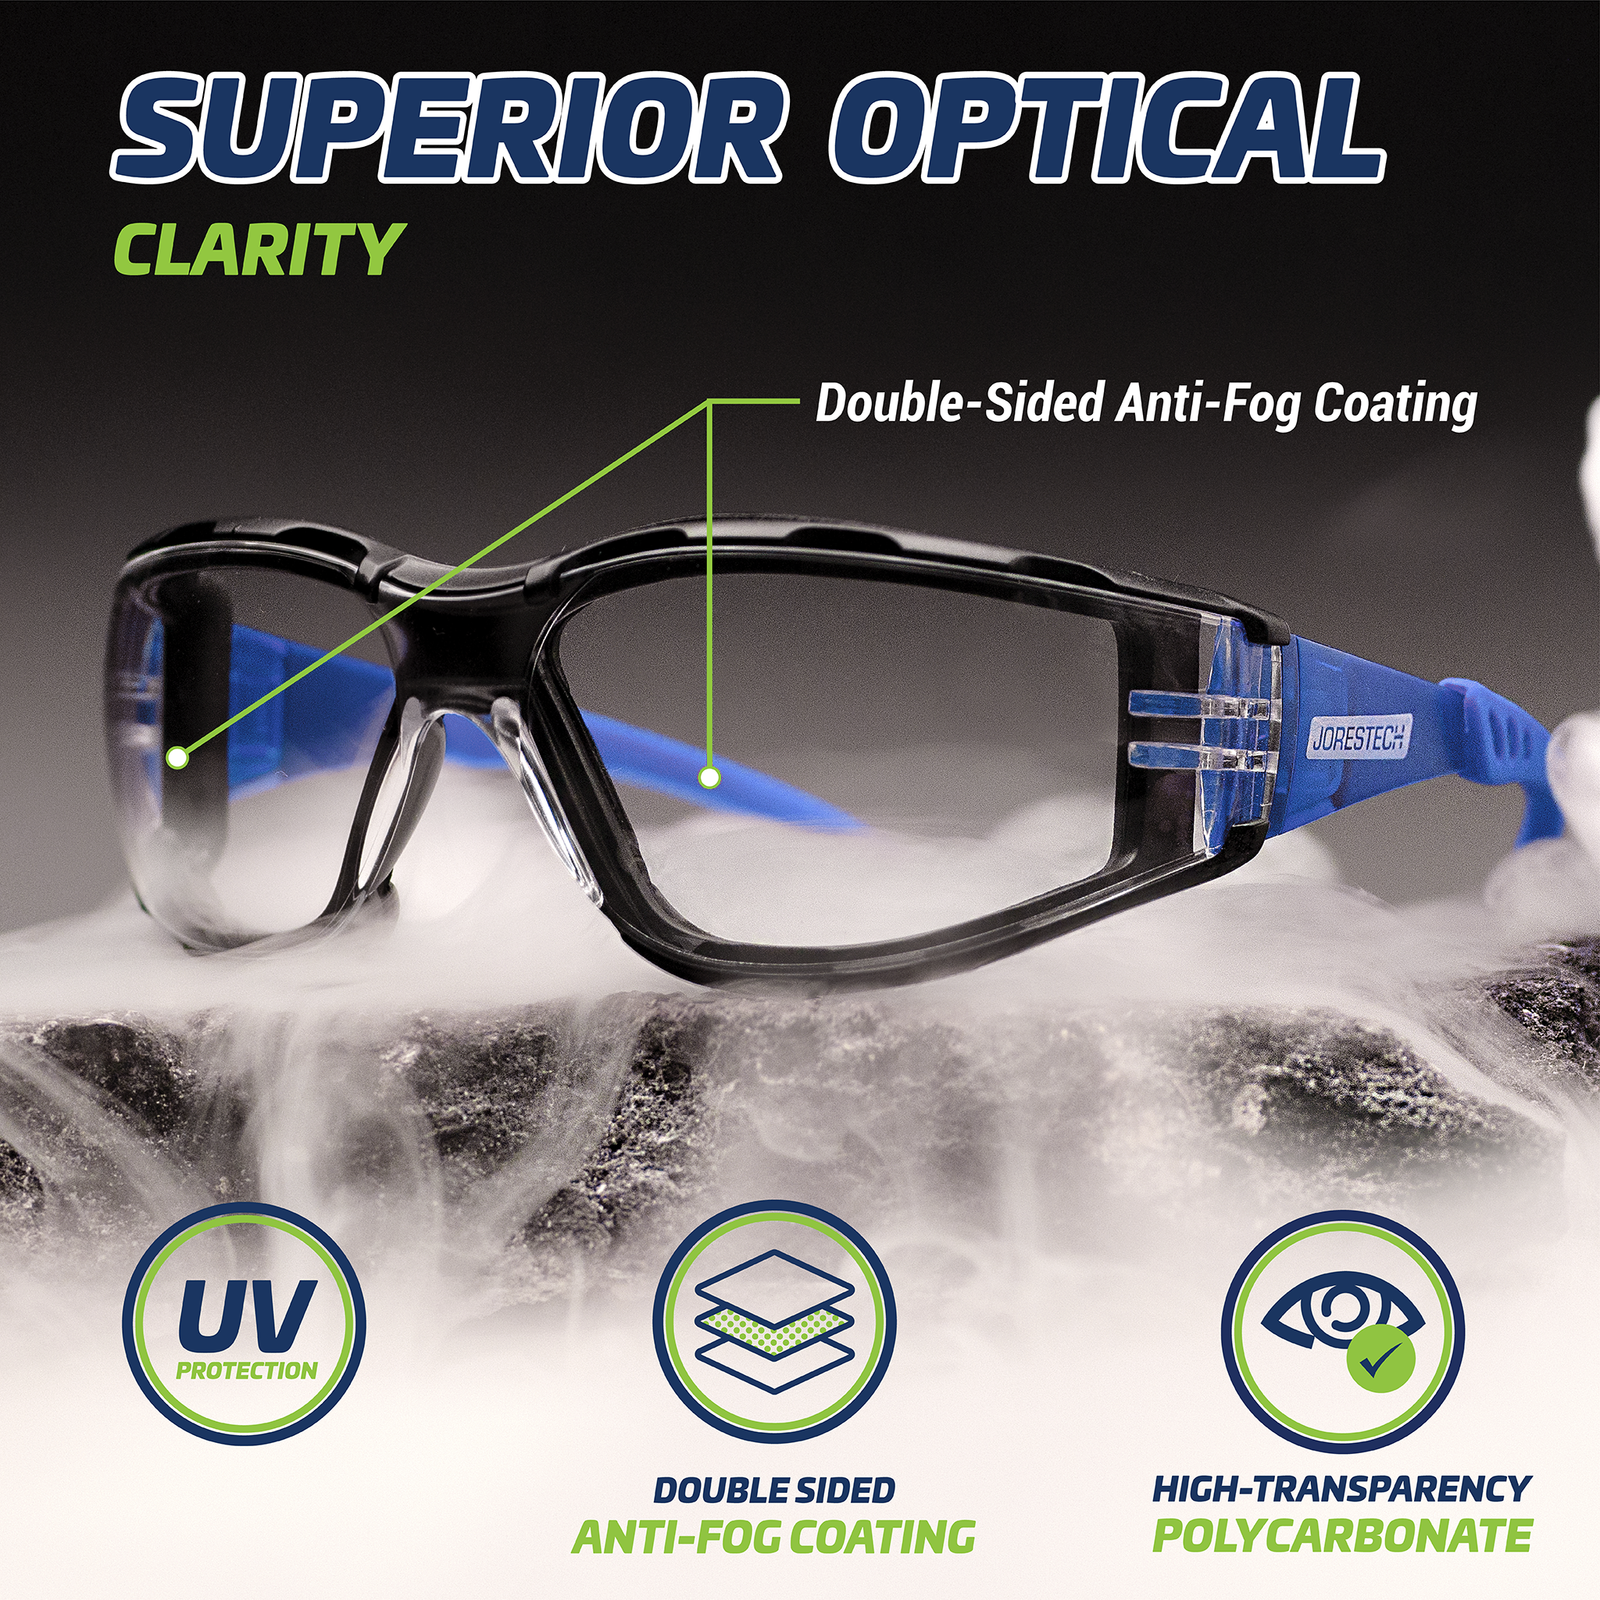 Features the blue and clear JORESTECH safety glasses on top of a rock and surrounded by water vapor to show glasses are anti fog. Text reads: superior optical clarity, Double sided anti fog coating, UV protection logo and high transparency logo.